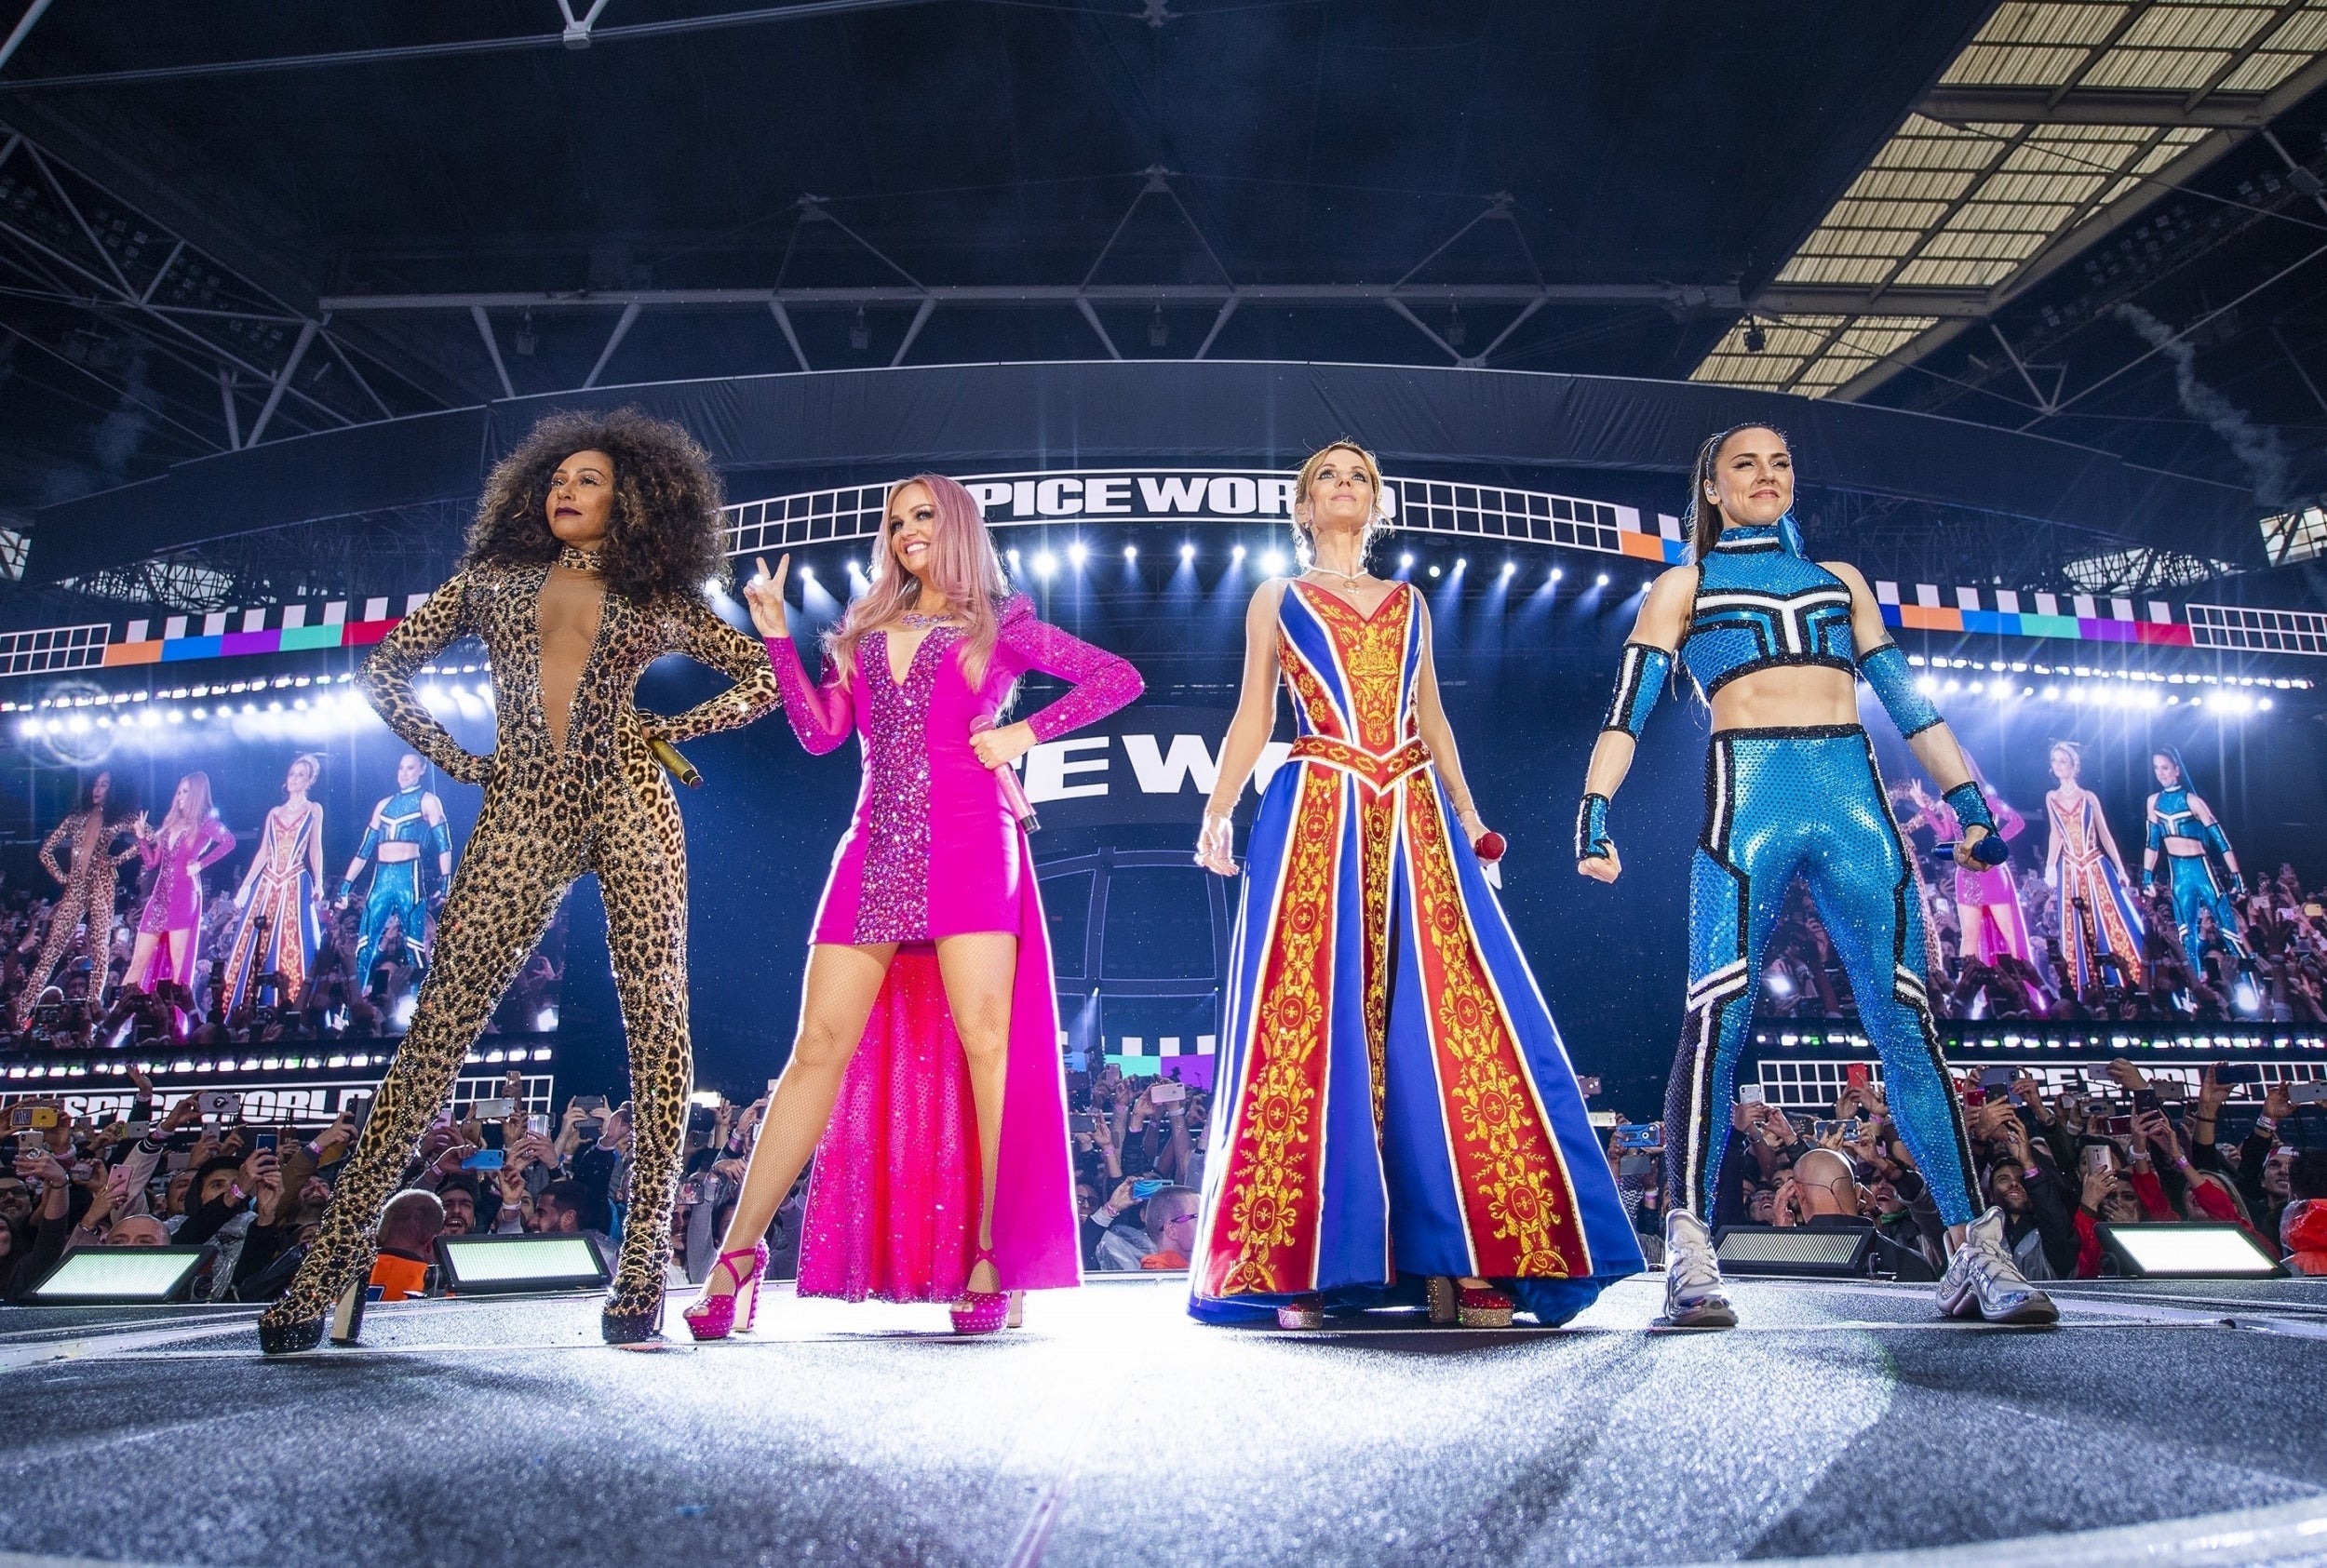 The Spice Girls live at Wembley Stadium this year